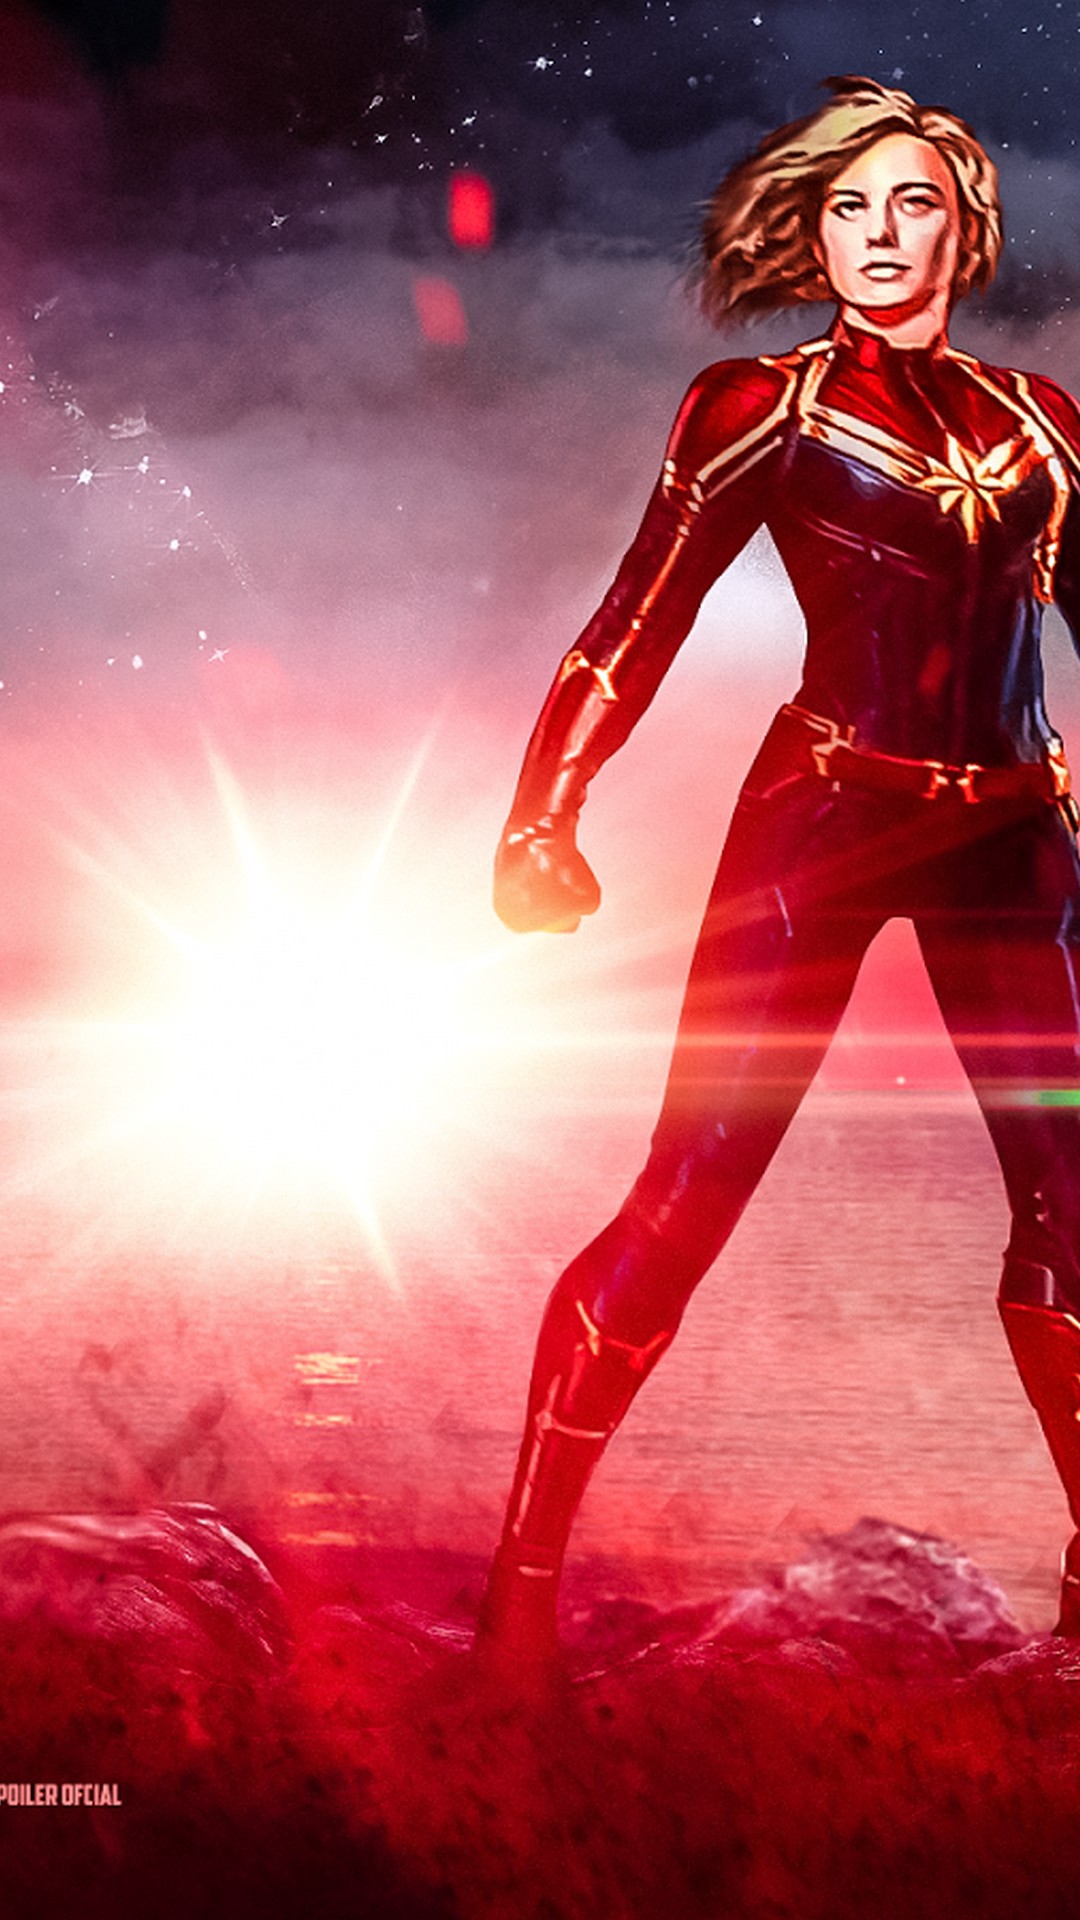 Free Download Mobile Wallpapers Captain Marvel 19 3d Iphone Wallpaper 1080x19 For Your Desktop Mobile Tablet Explore 32 Captain Marvel Phone Wallpapers Captain Marvel Phone Wallpapers Captain Marvel Wallpaper Captain Marvel Wallpapers